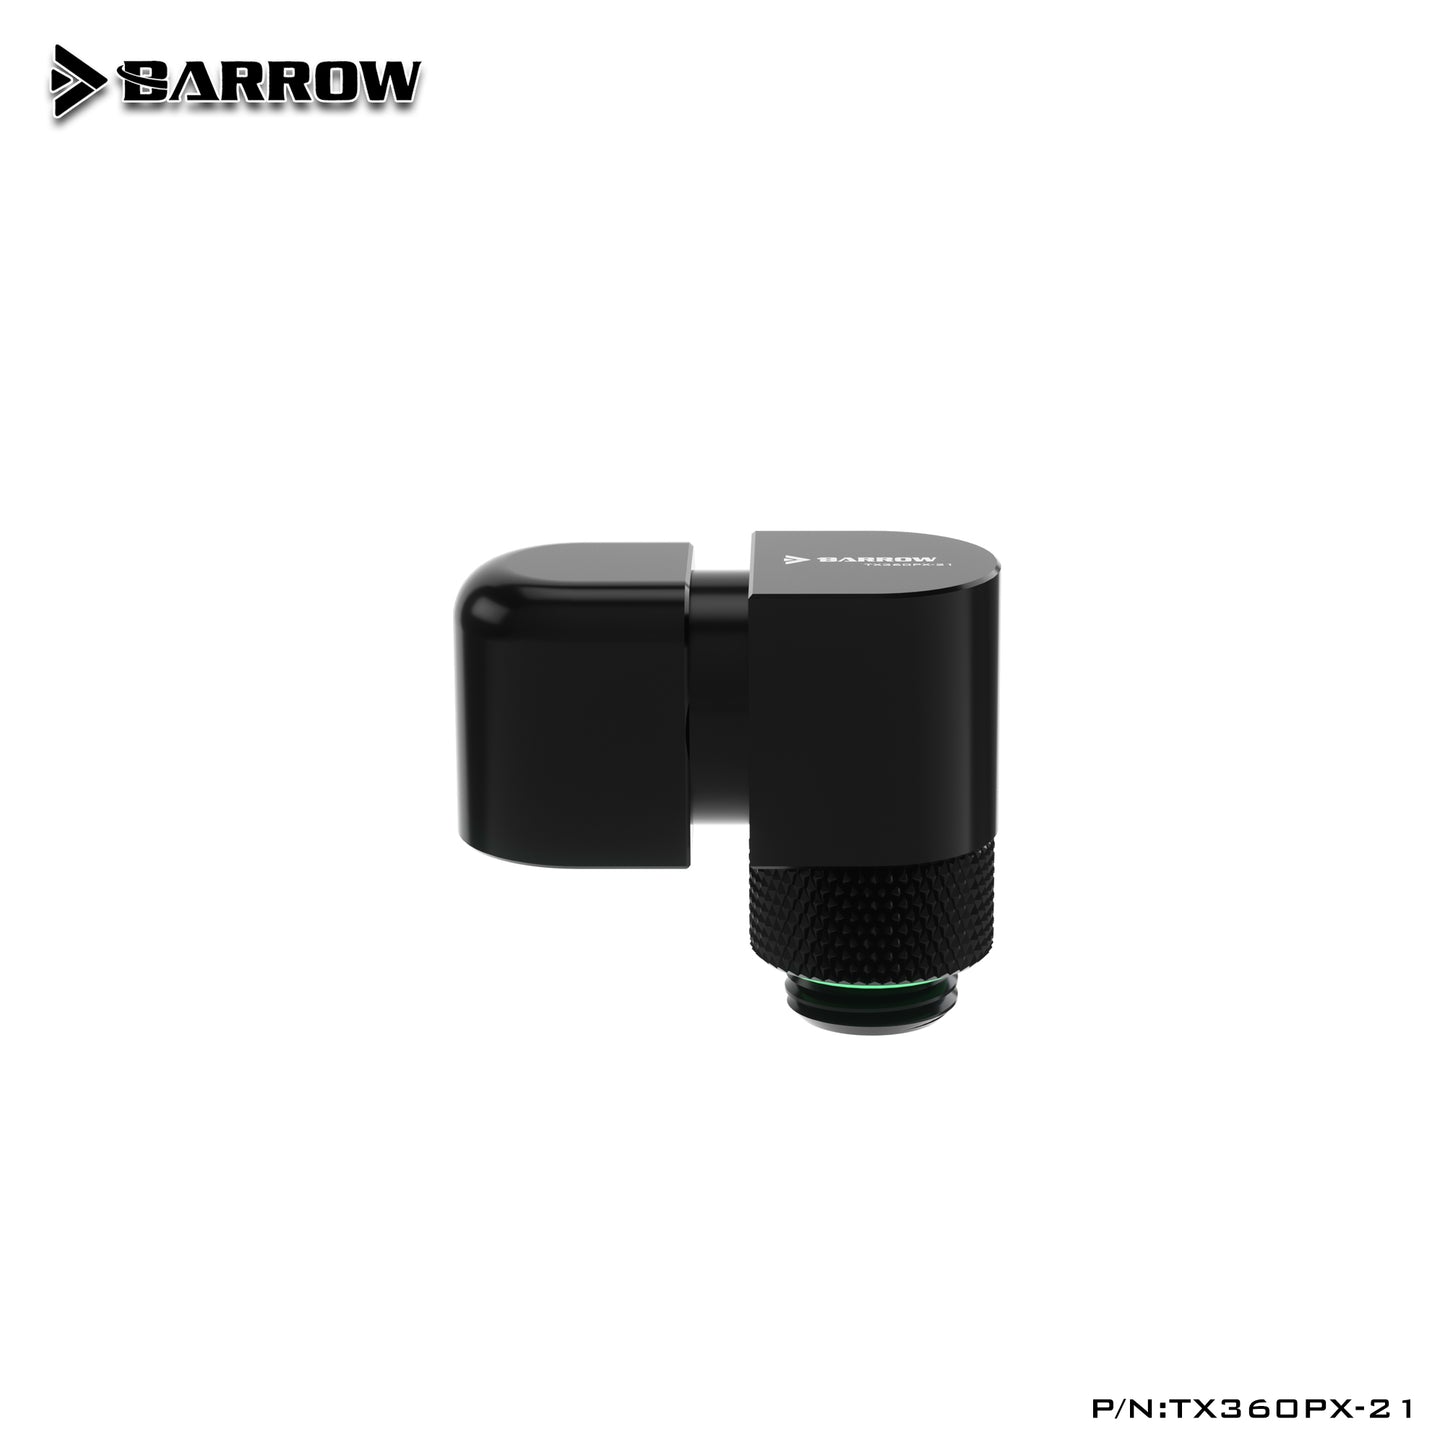 Barrow 360 Rotation Offset Fitting With 21mm, G1/4" Rotary 21mm Offset Adapter, For Water Cooling Port/Tube Fine-tuning Offset, TX360PX-21